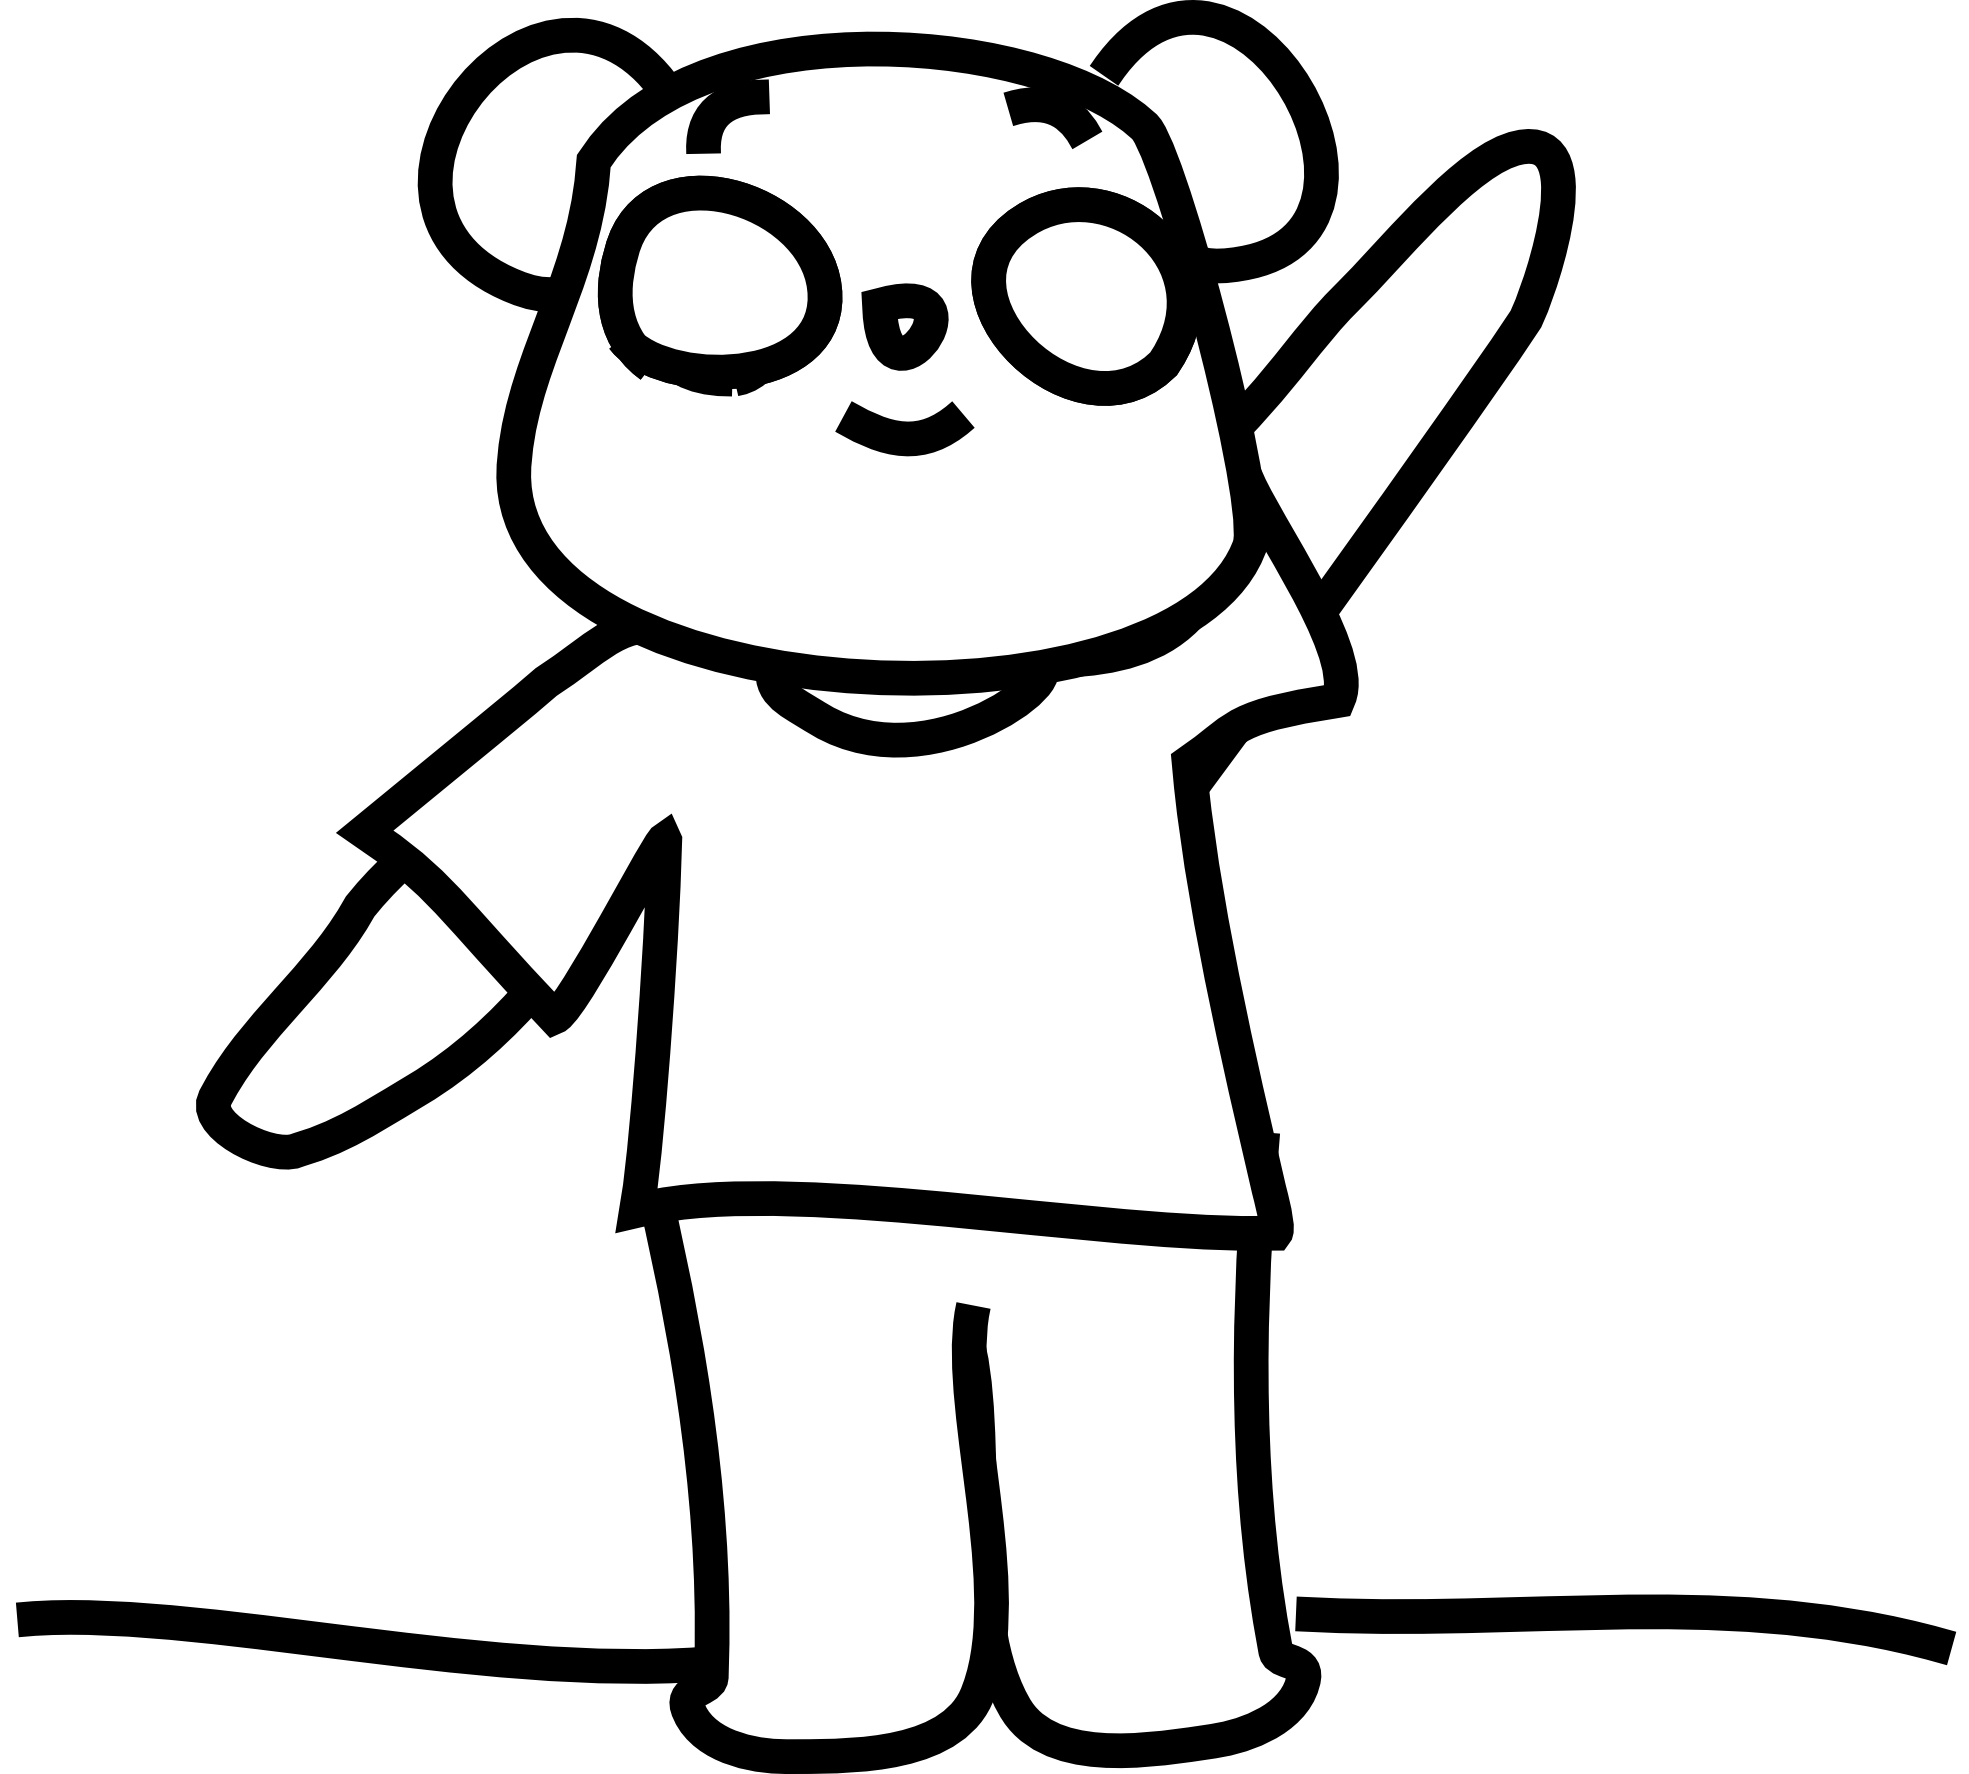 teddy bear clipart black and white - photo #34